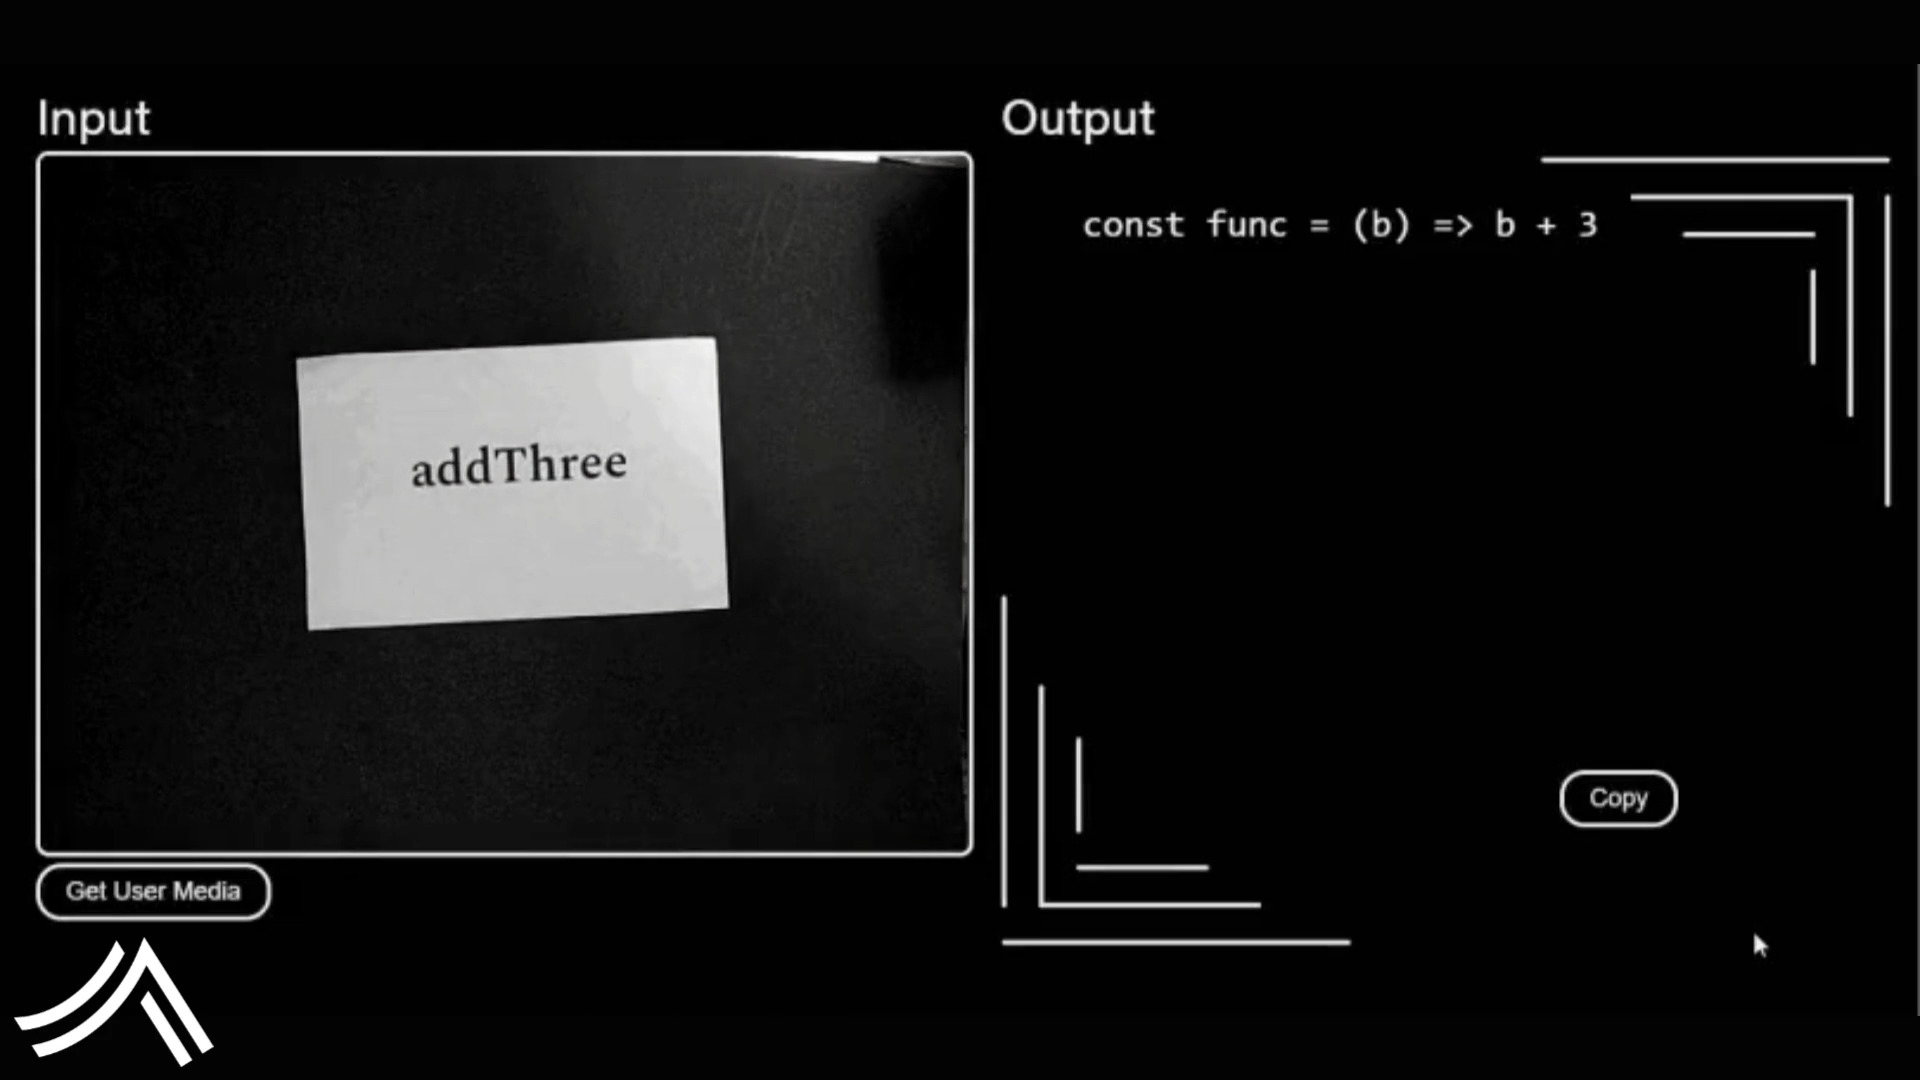 On the left side, a notecard that says addThree. On the right side, an output of const func = (b) => b + 3